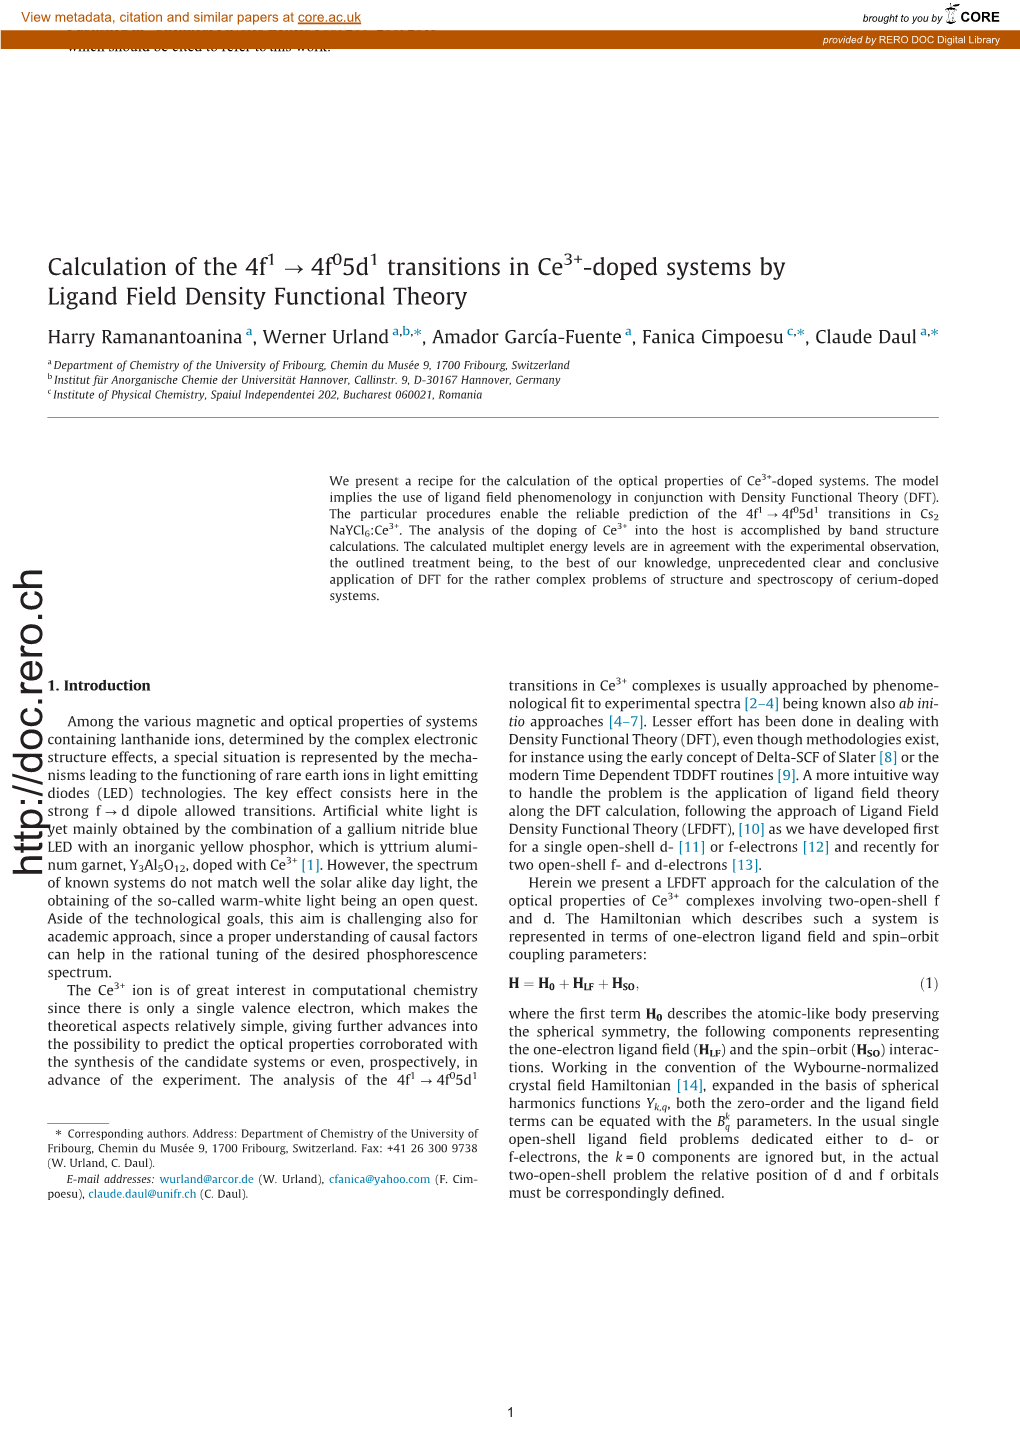 Calculation of the 4F1→4F05d1 Transitions in Ce3+-Doped Systems